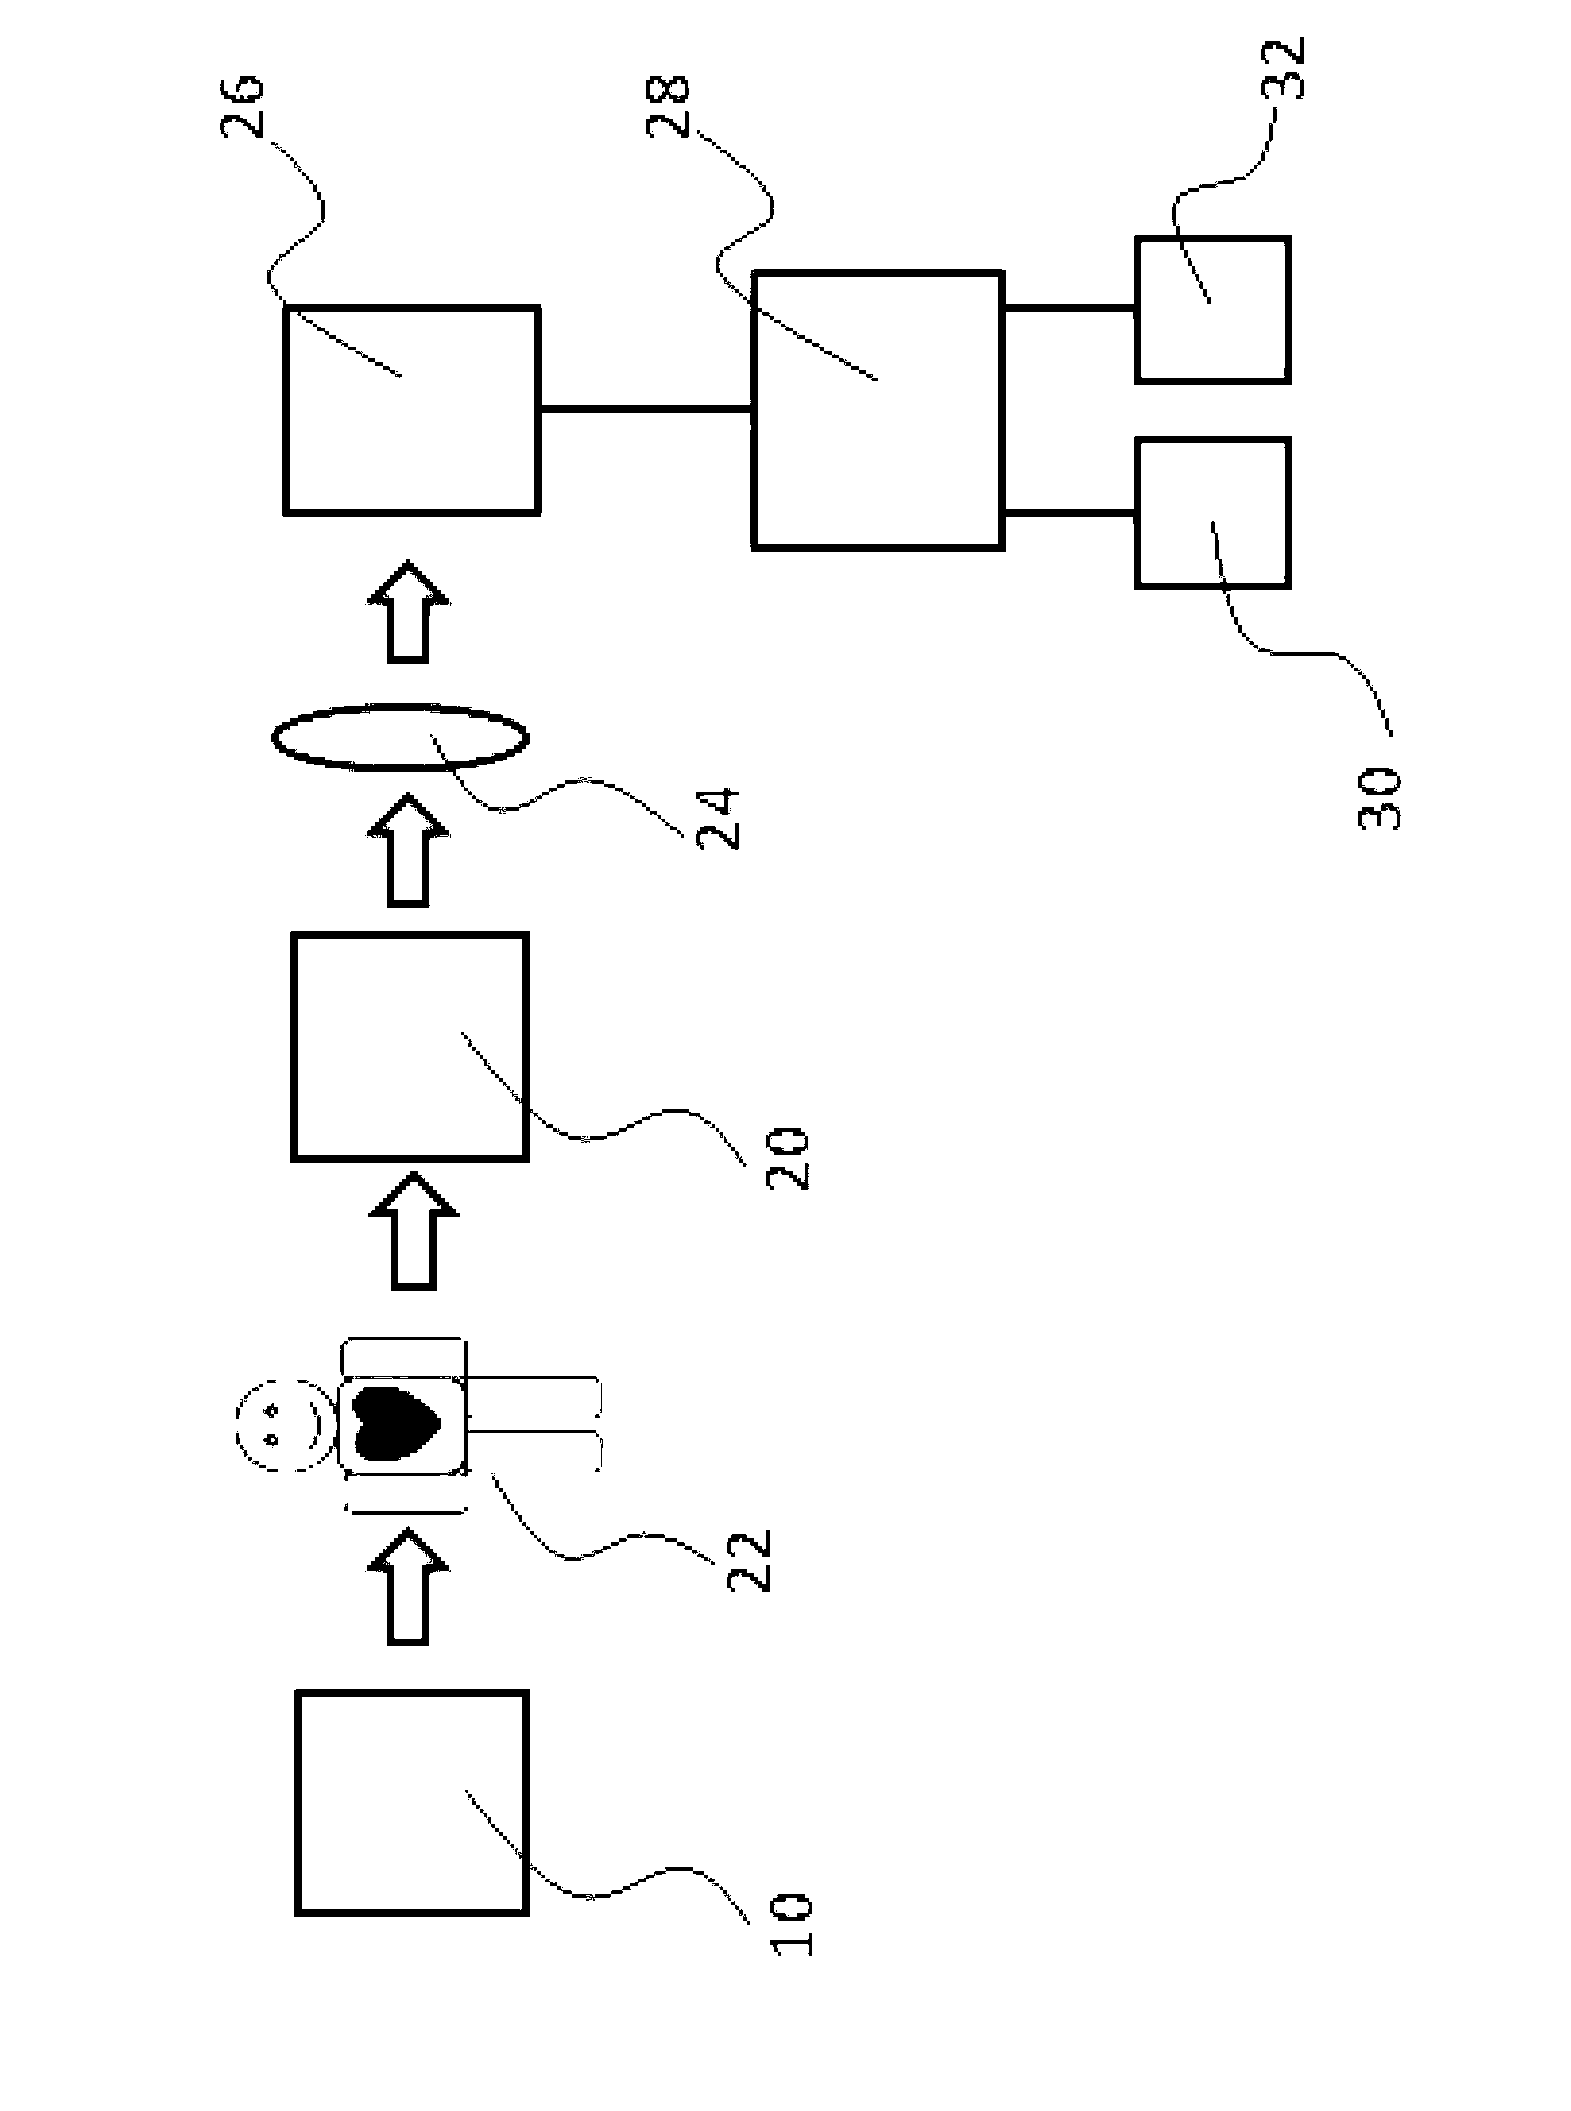 System and method for using light modulation to measure physiological data